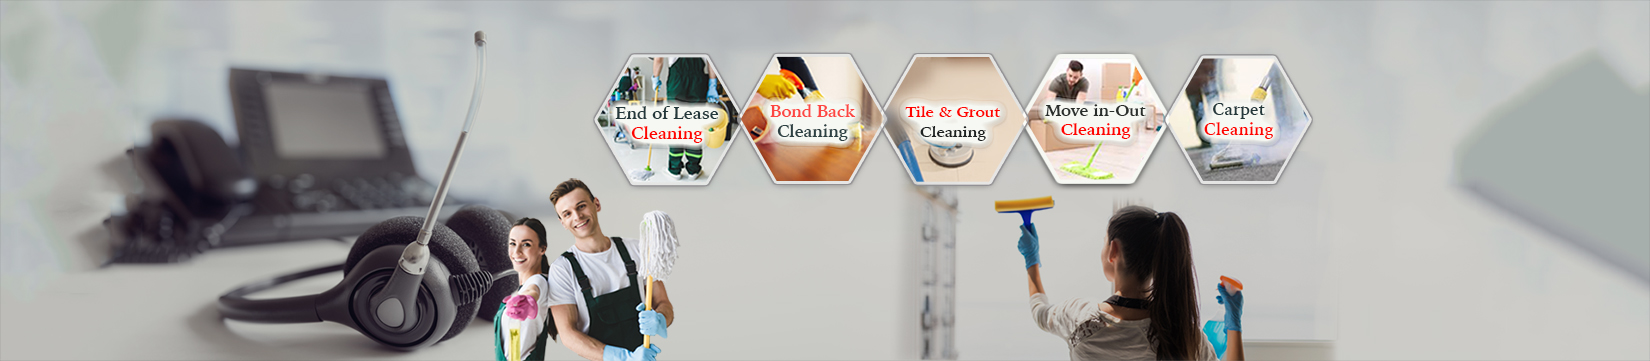 365 cleaners contact us